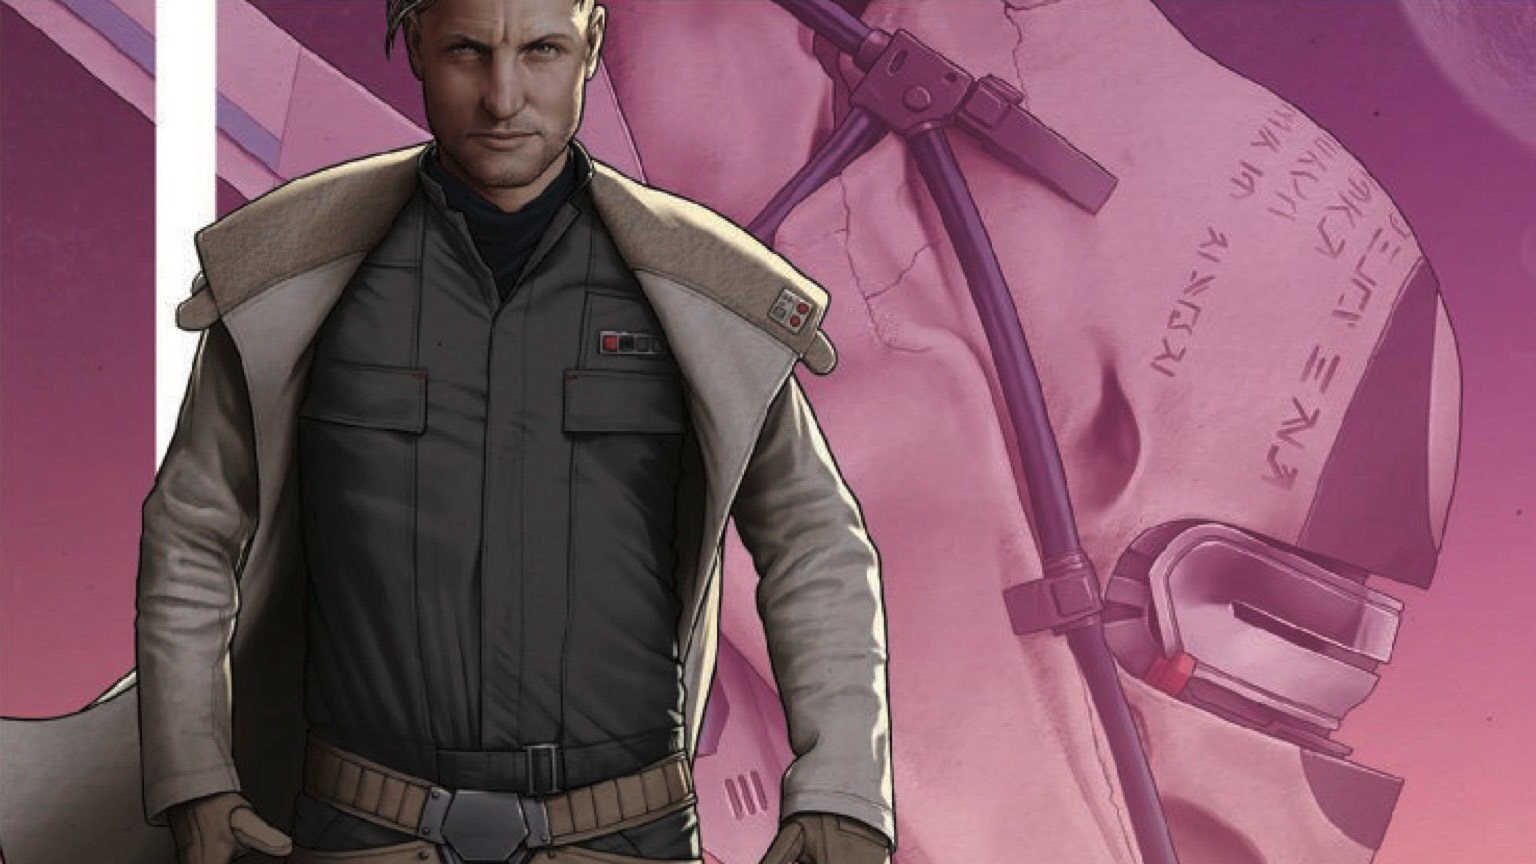 The Galaxy in Comics: Beckett #1 and the Grit of a Gunslinger